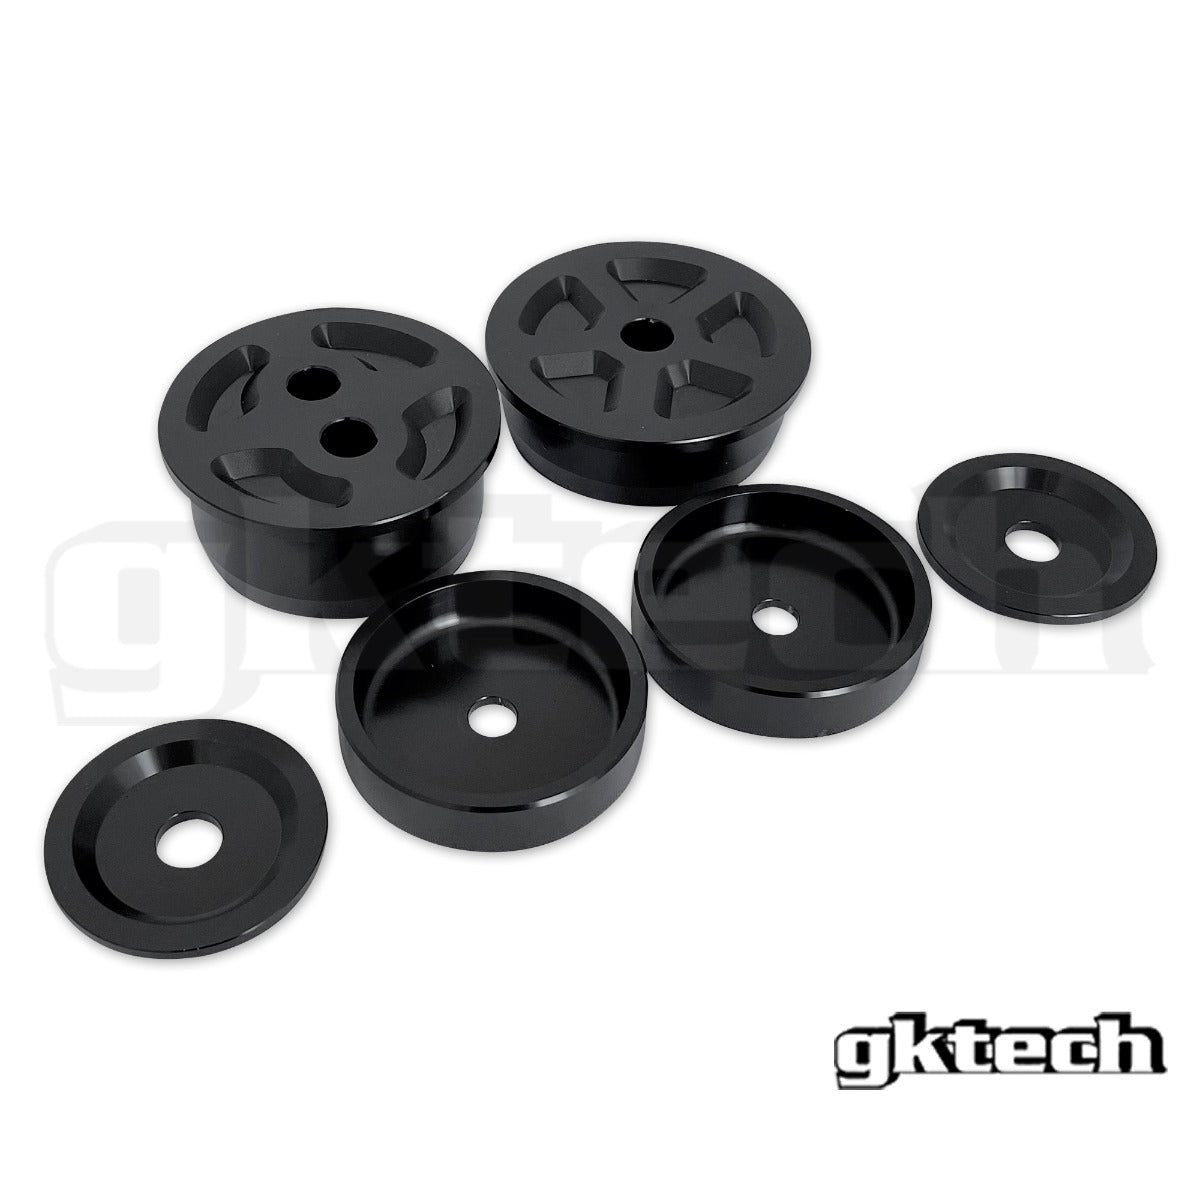 FR-S / GR86 / BRZ SOLID DIFF BUSHINGS